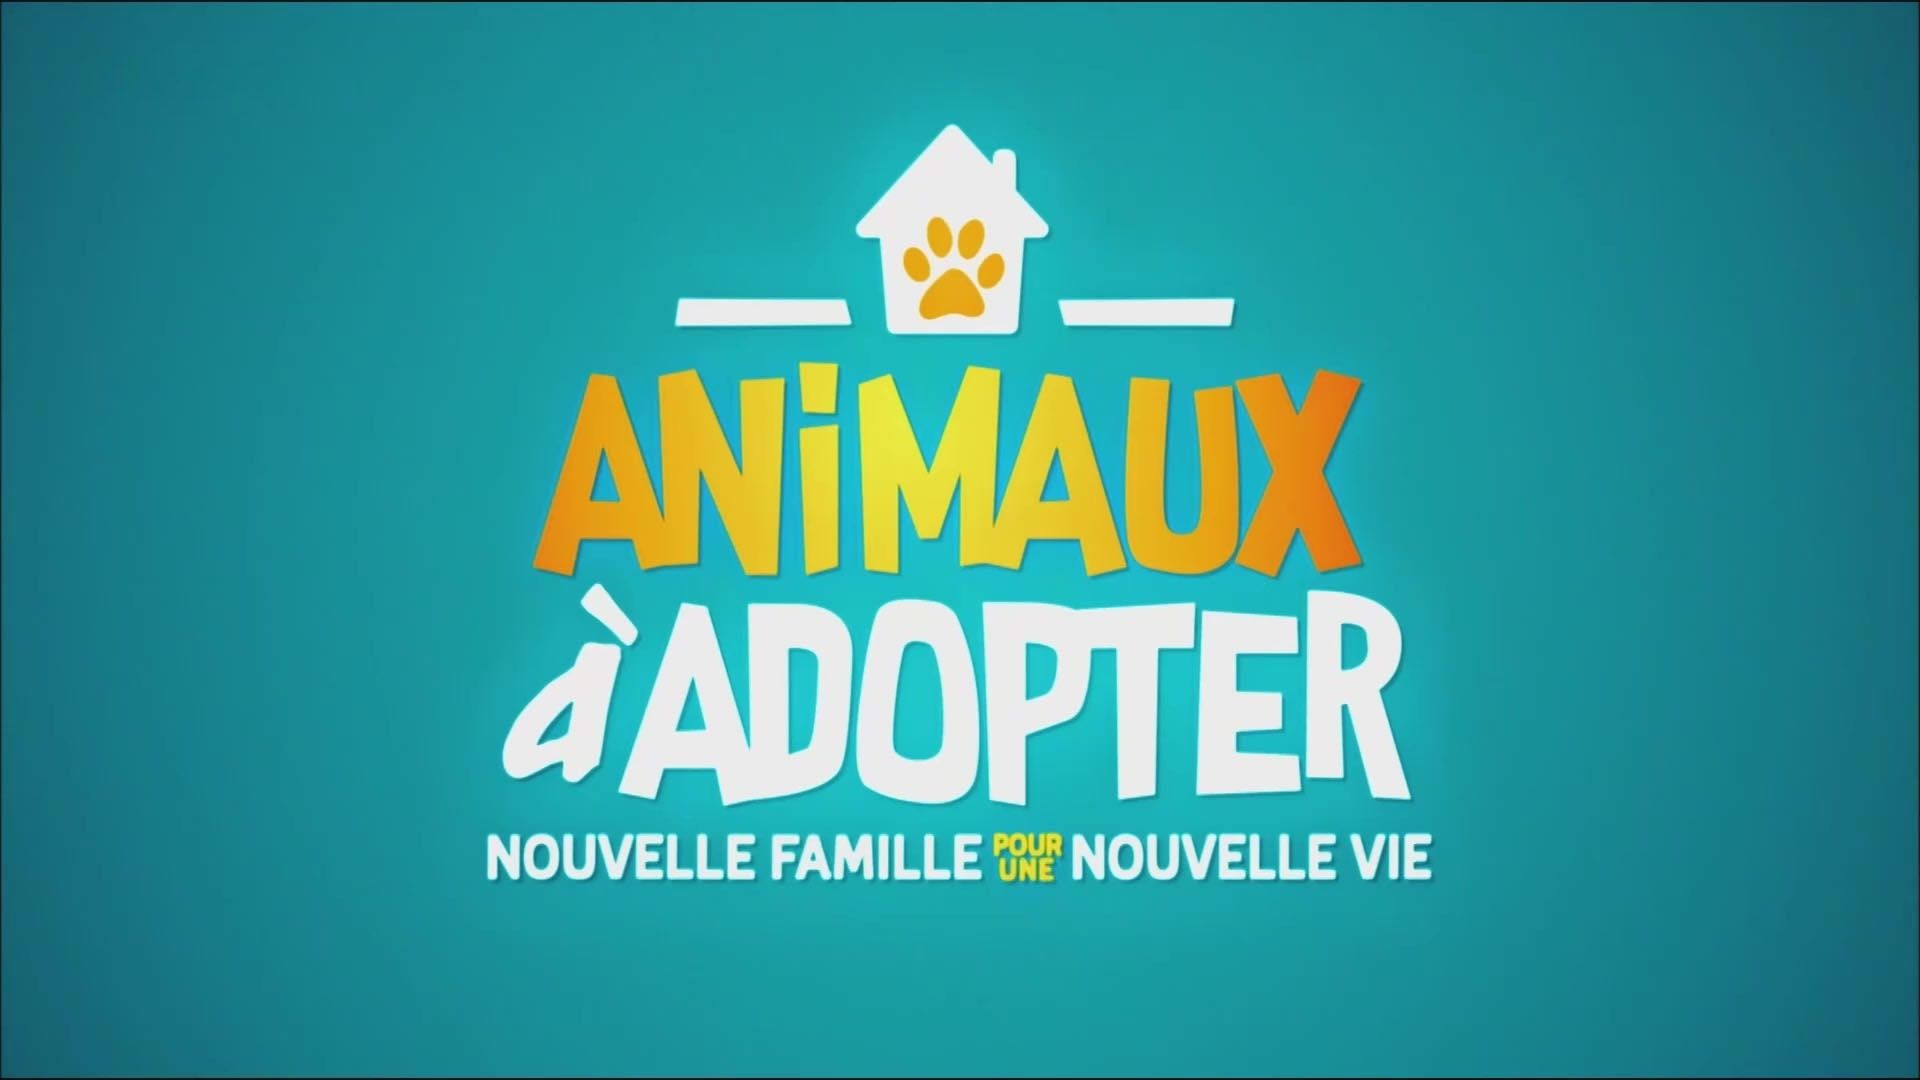 Animaux à adopter